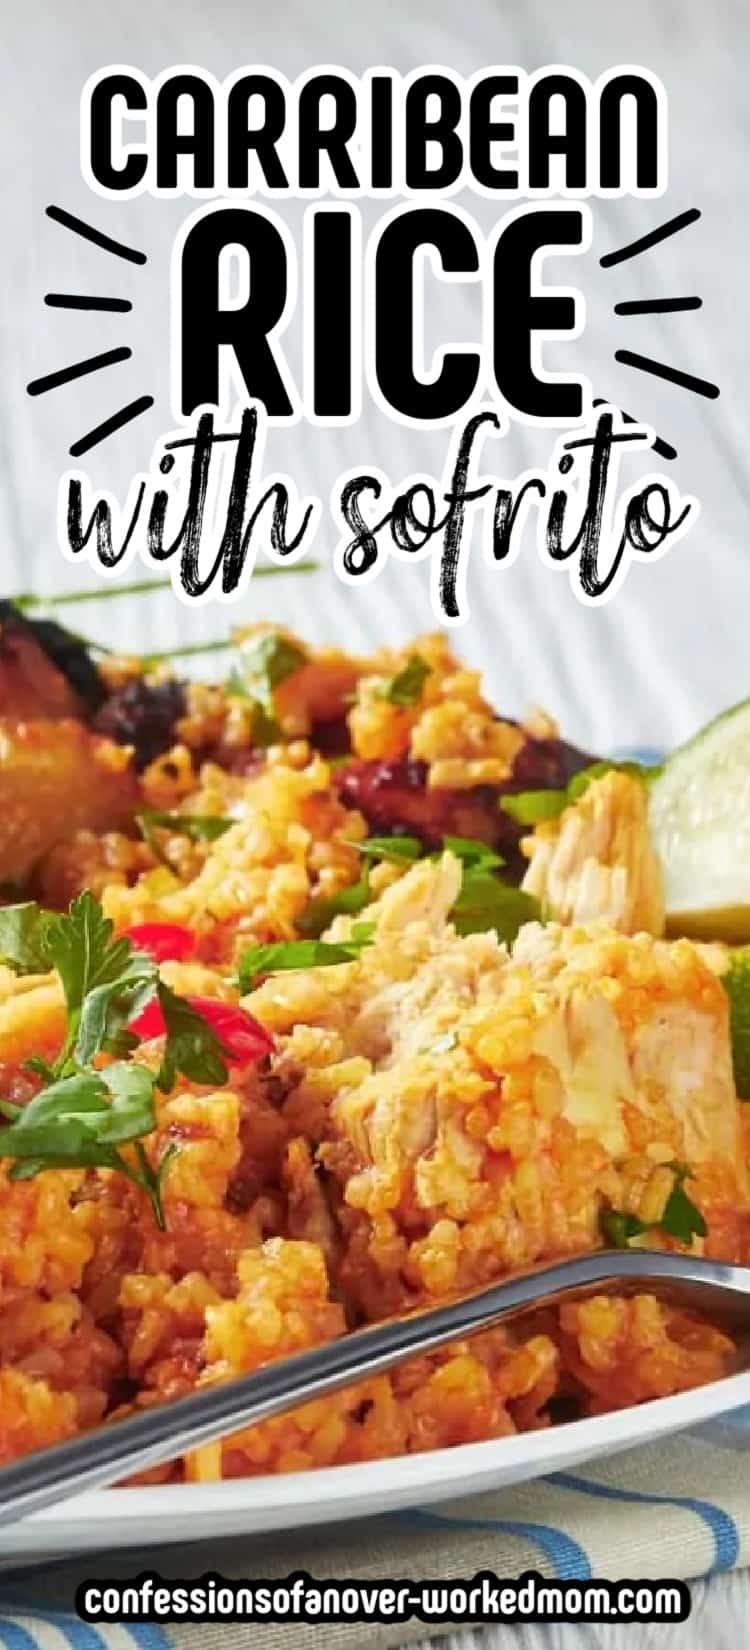 Need a Caribbean rice recipe? This rice sofrito recipe is a Jamaican seasoned rice that you can make as a side or a simple main course. Try it today.